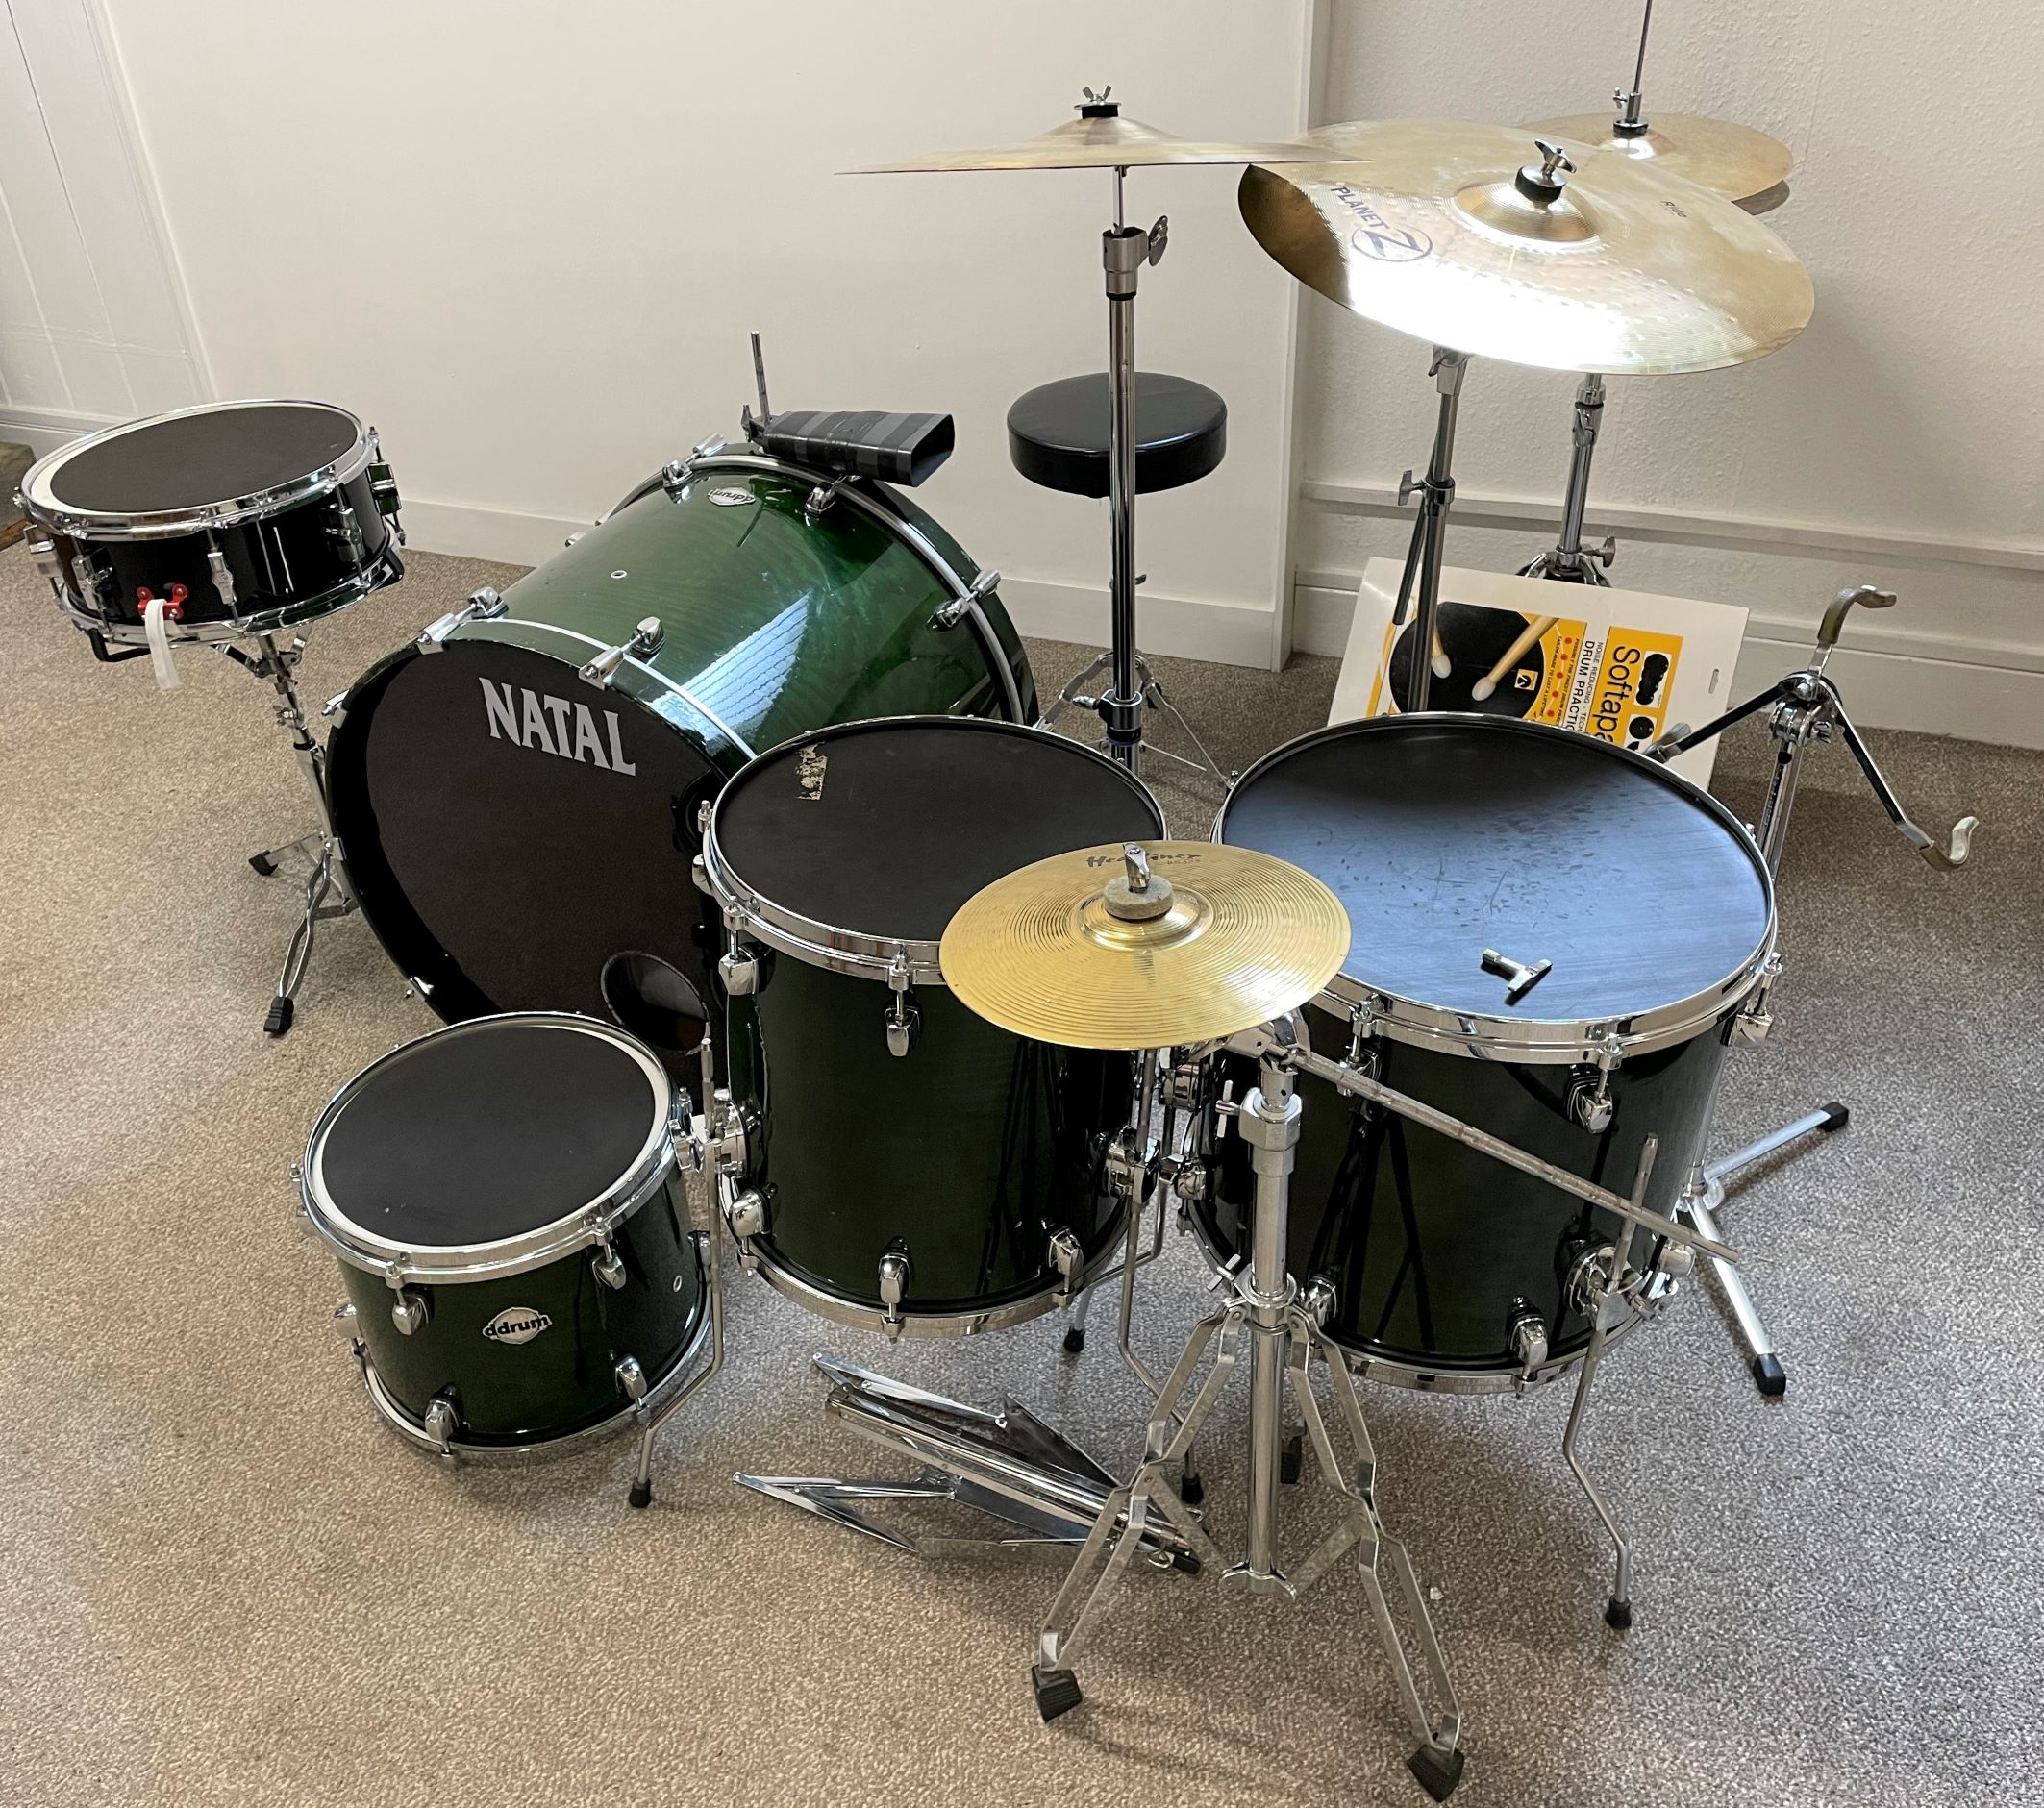 Natal drum kit comprising ride cymbal, floor tom tom x 2, small tom tom, floor base drum with pedal,